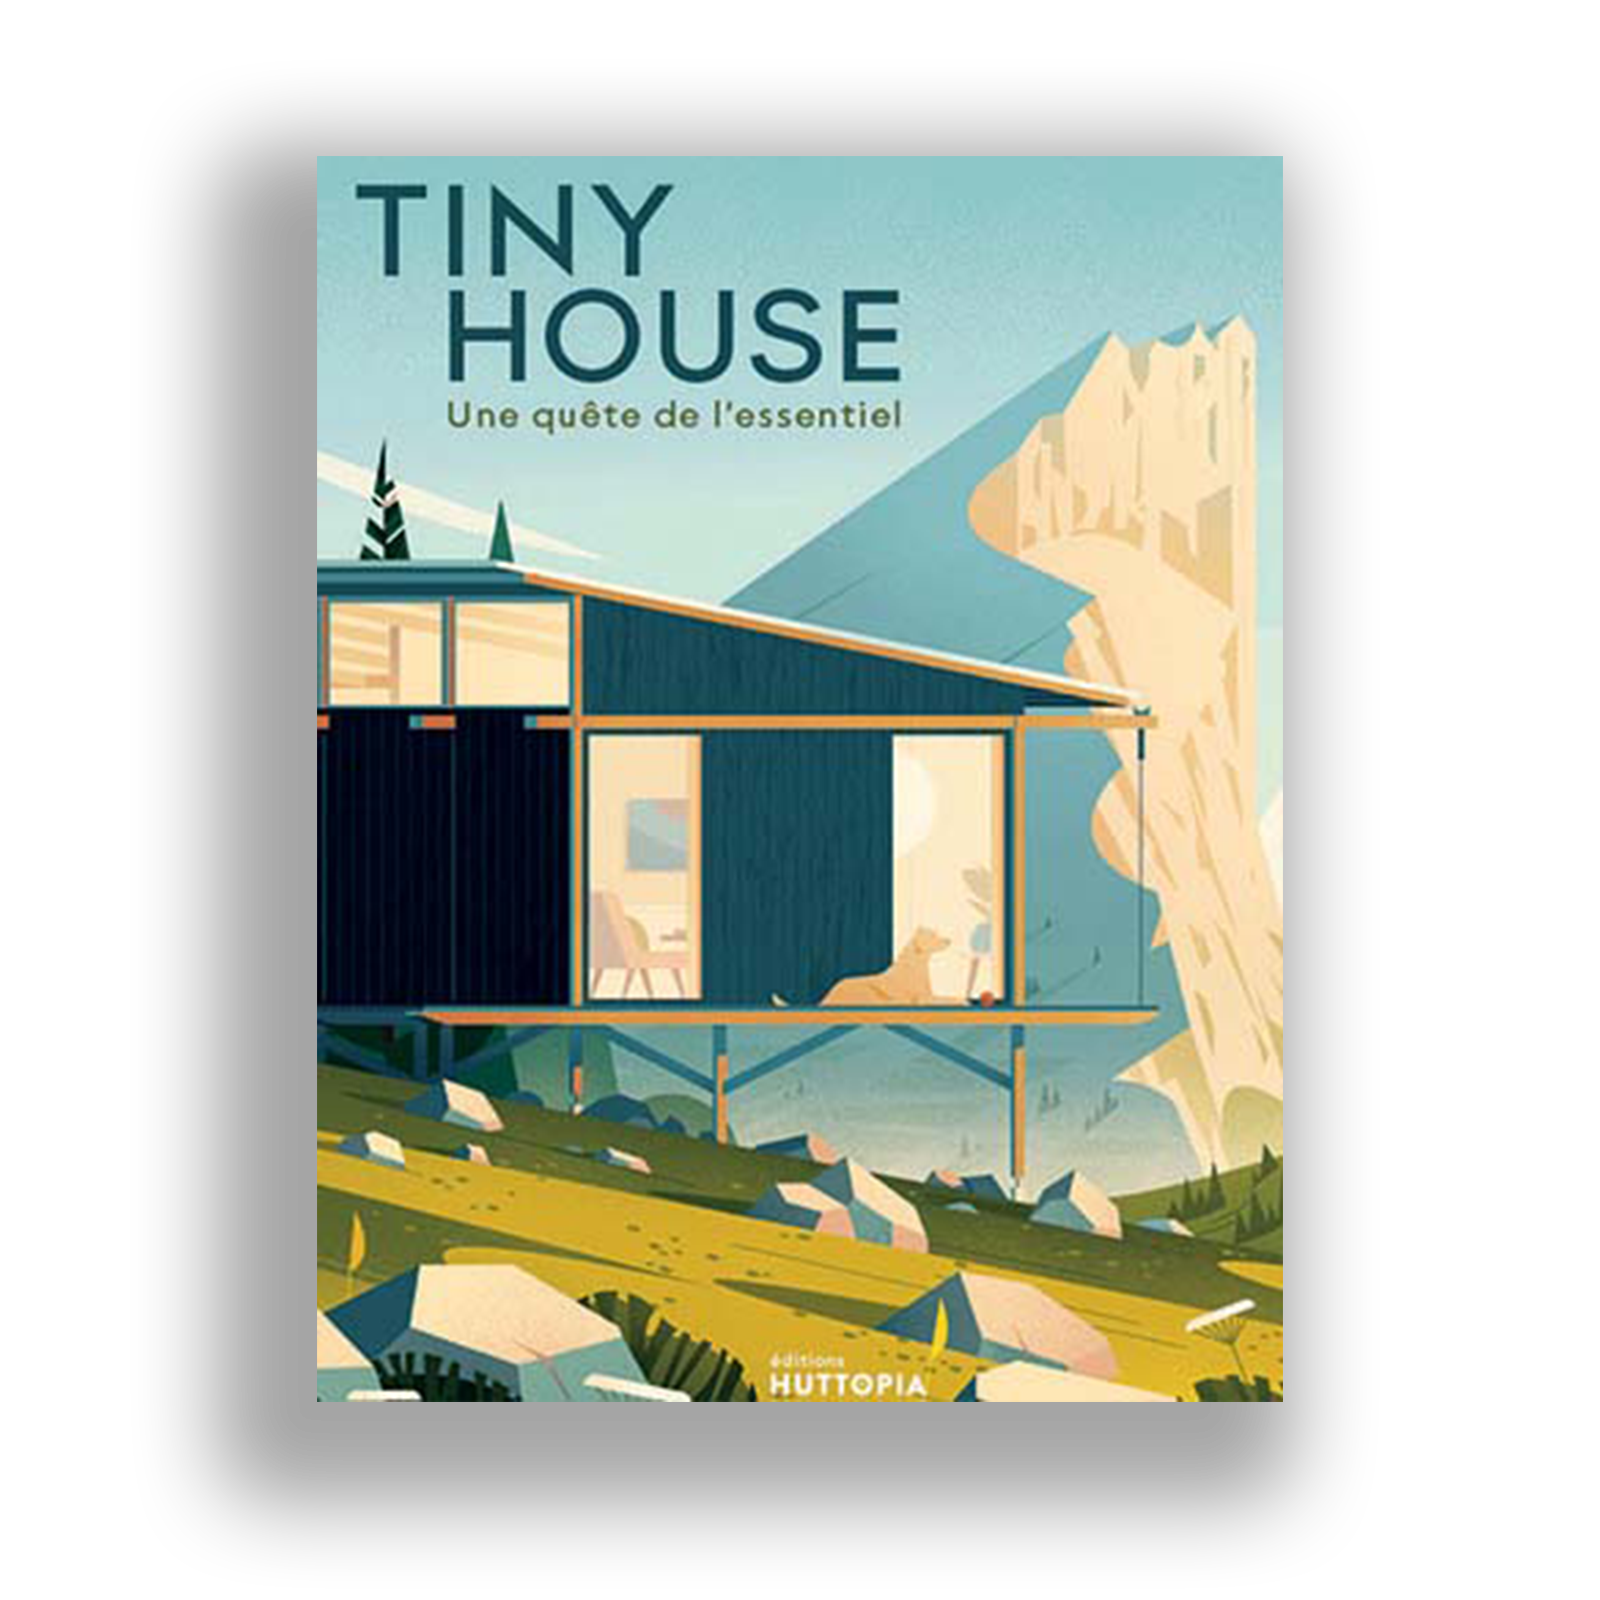 Tiny House, a quest for the essential